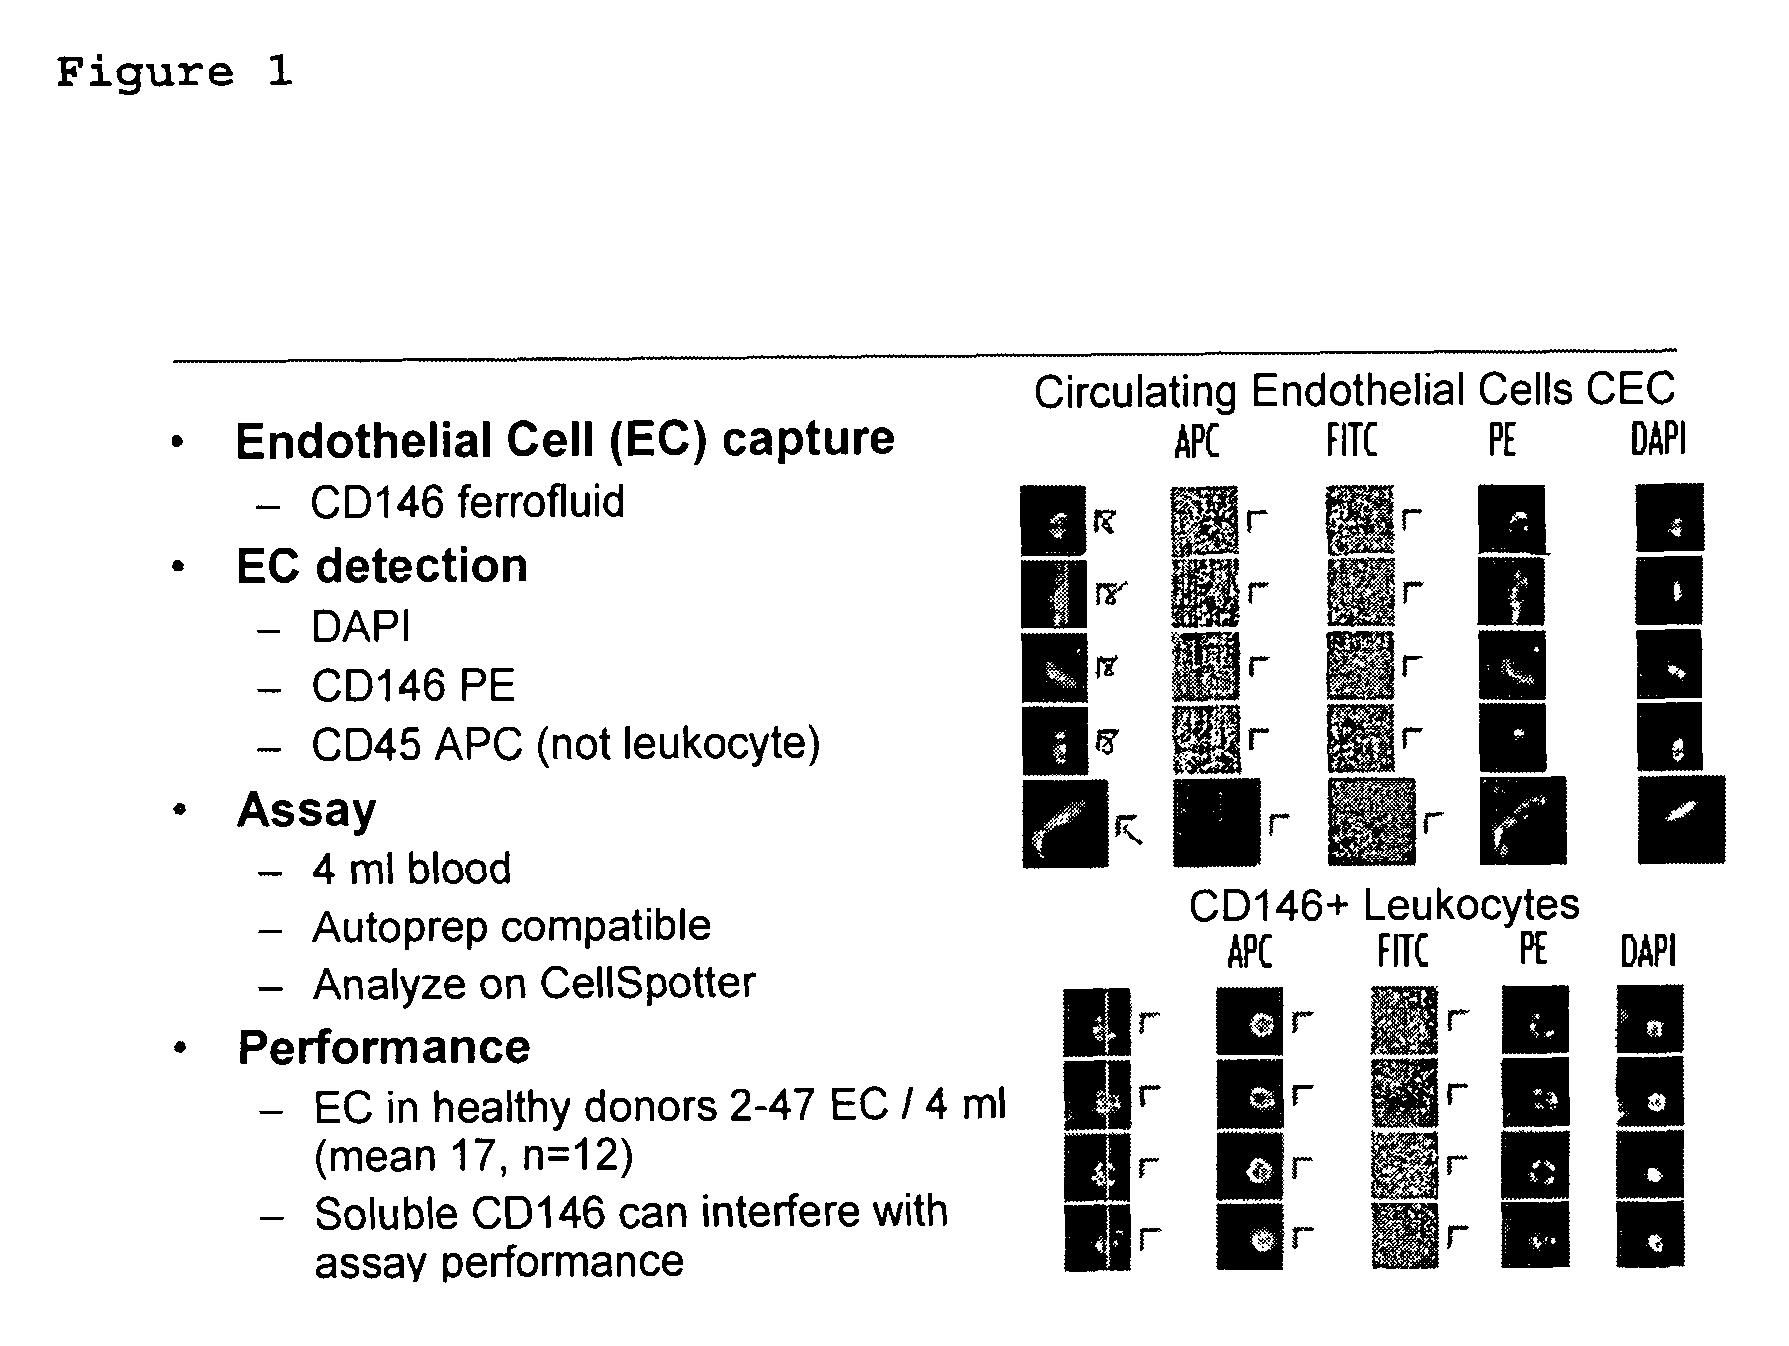 Method for assessing disease states by profile analysis of isolated circulating endothelial cells